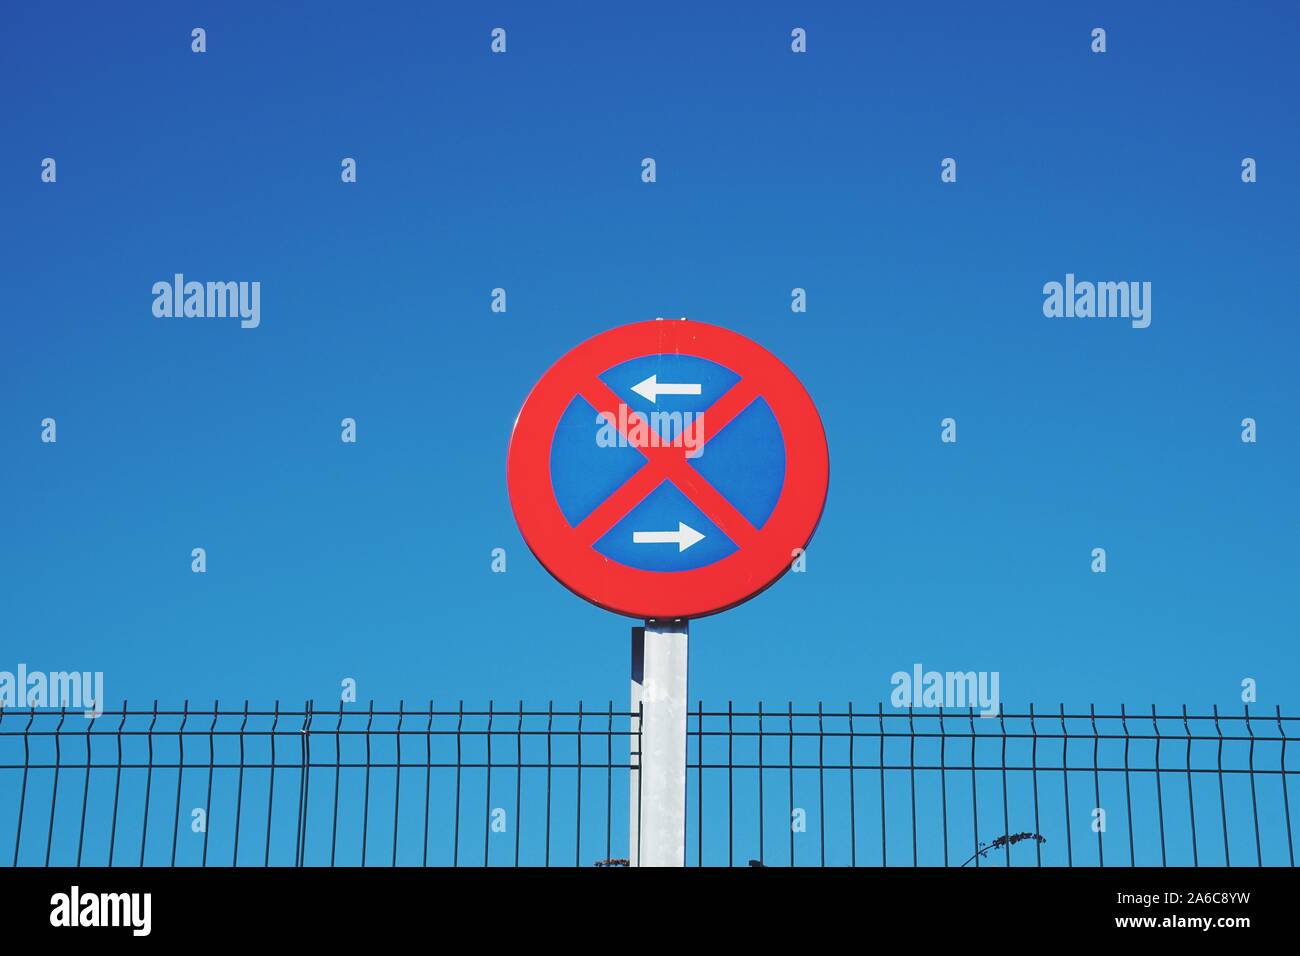 no parking traffic signal on the street in Bilbao city Spain Stock Photo